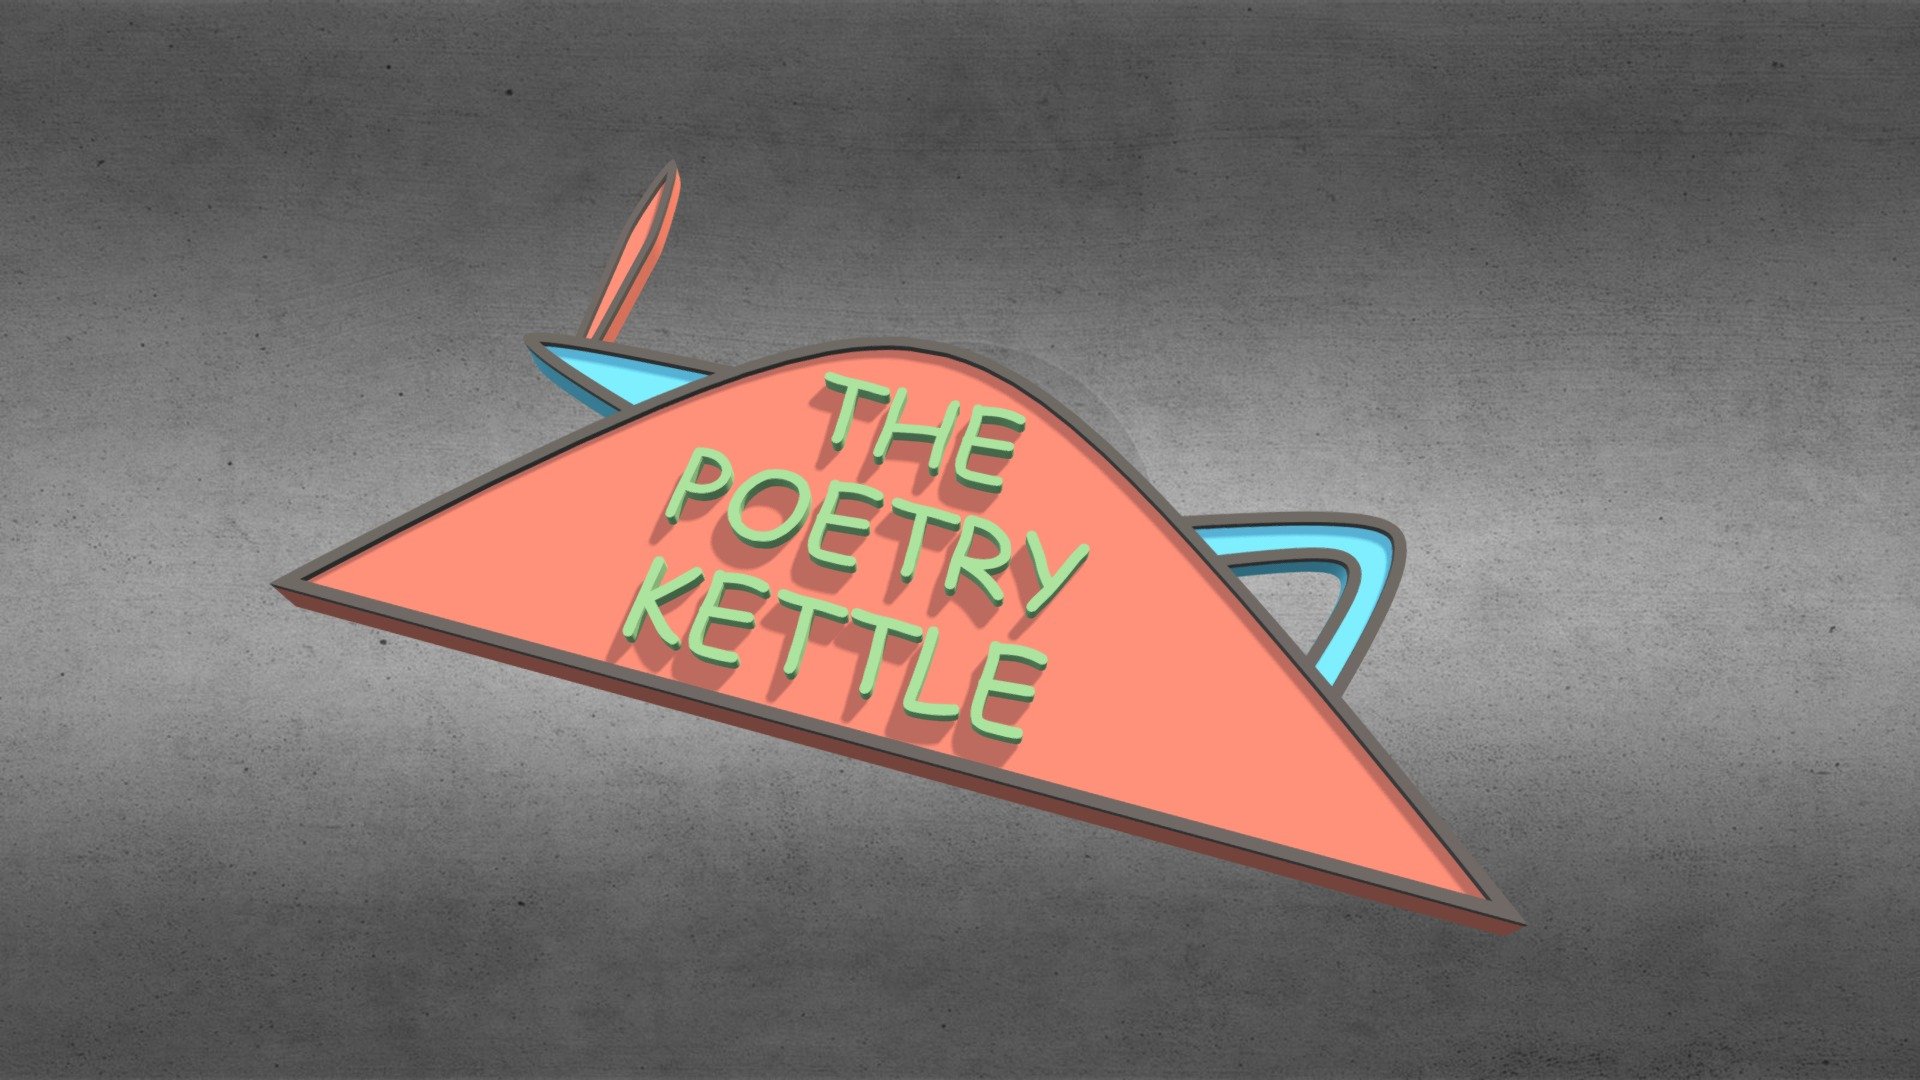 The Poetry Kettle